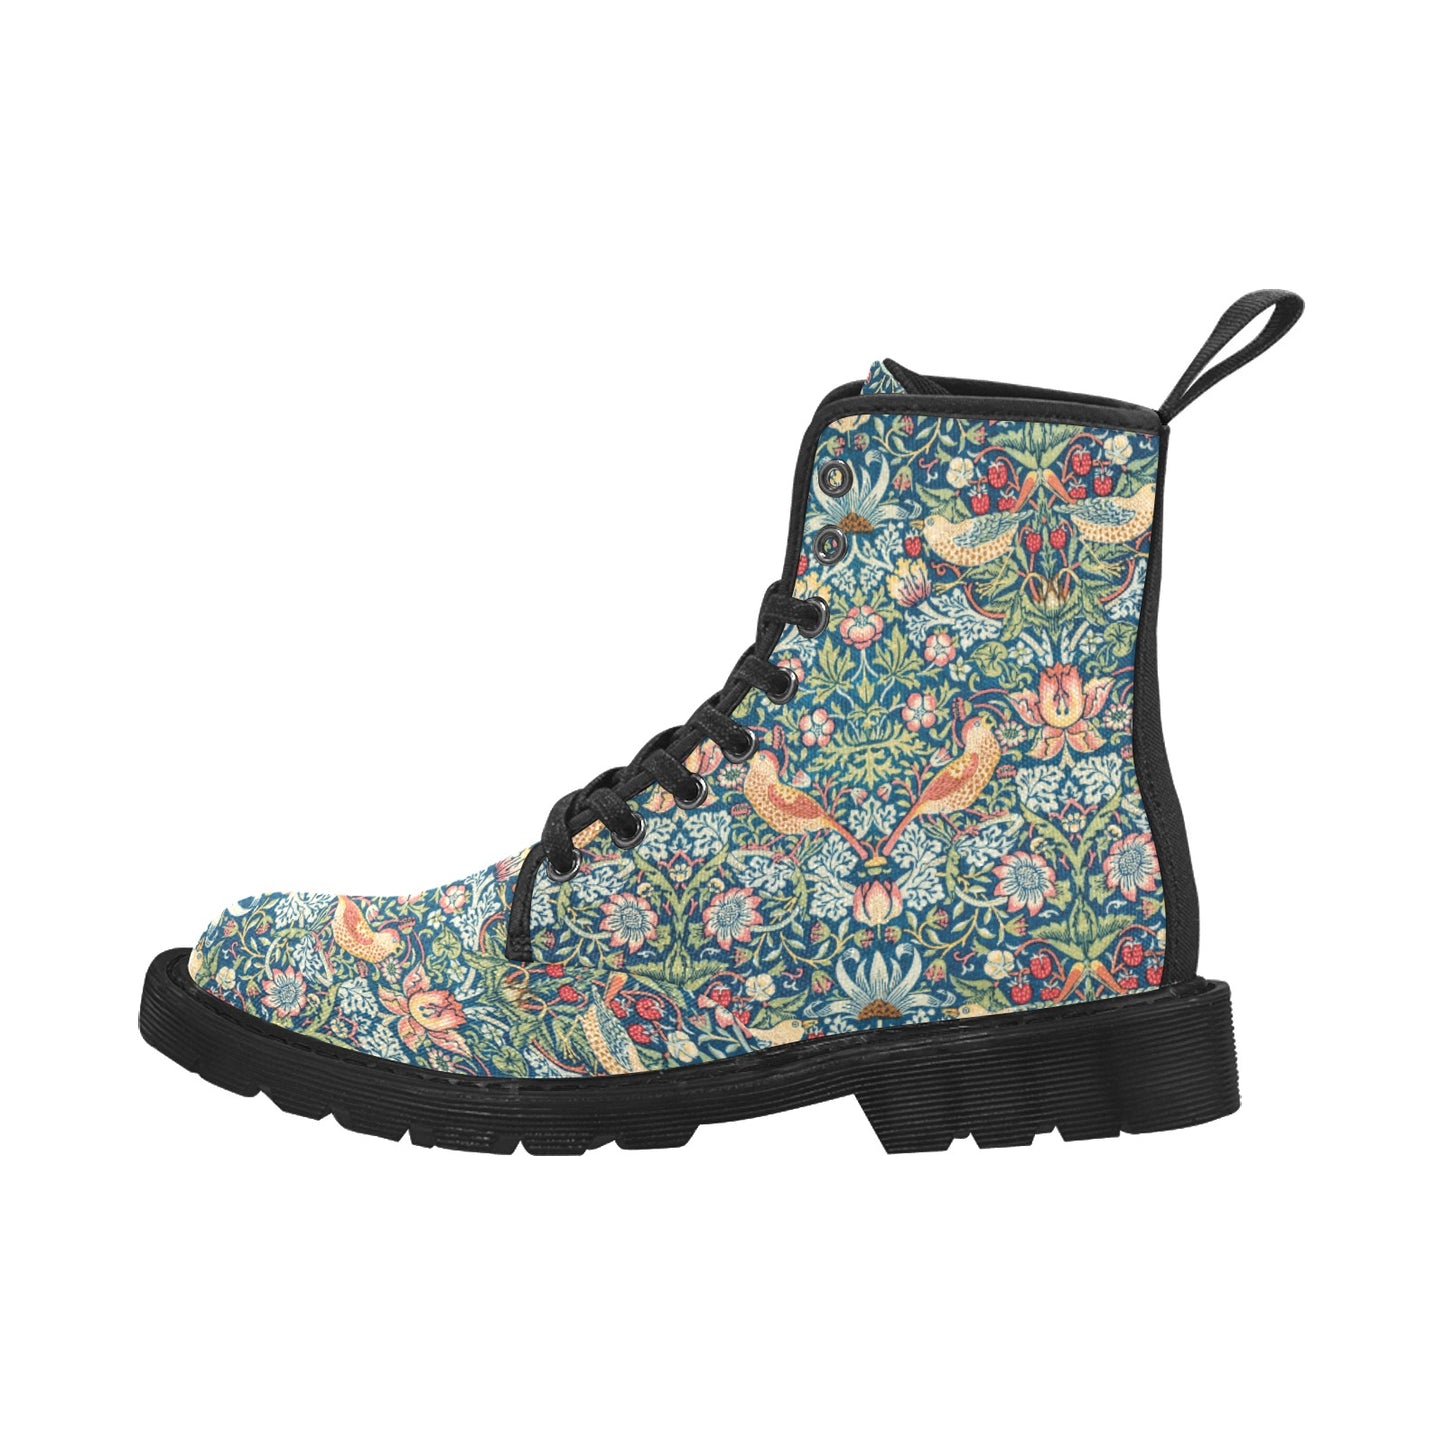 Men’s Flowered Canvas Boots with Strawberry Thief William Morris Wallpaper Design